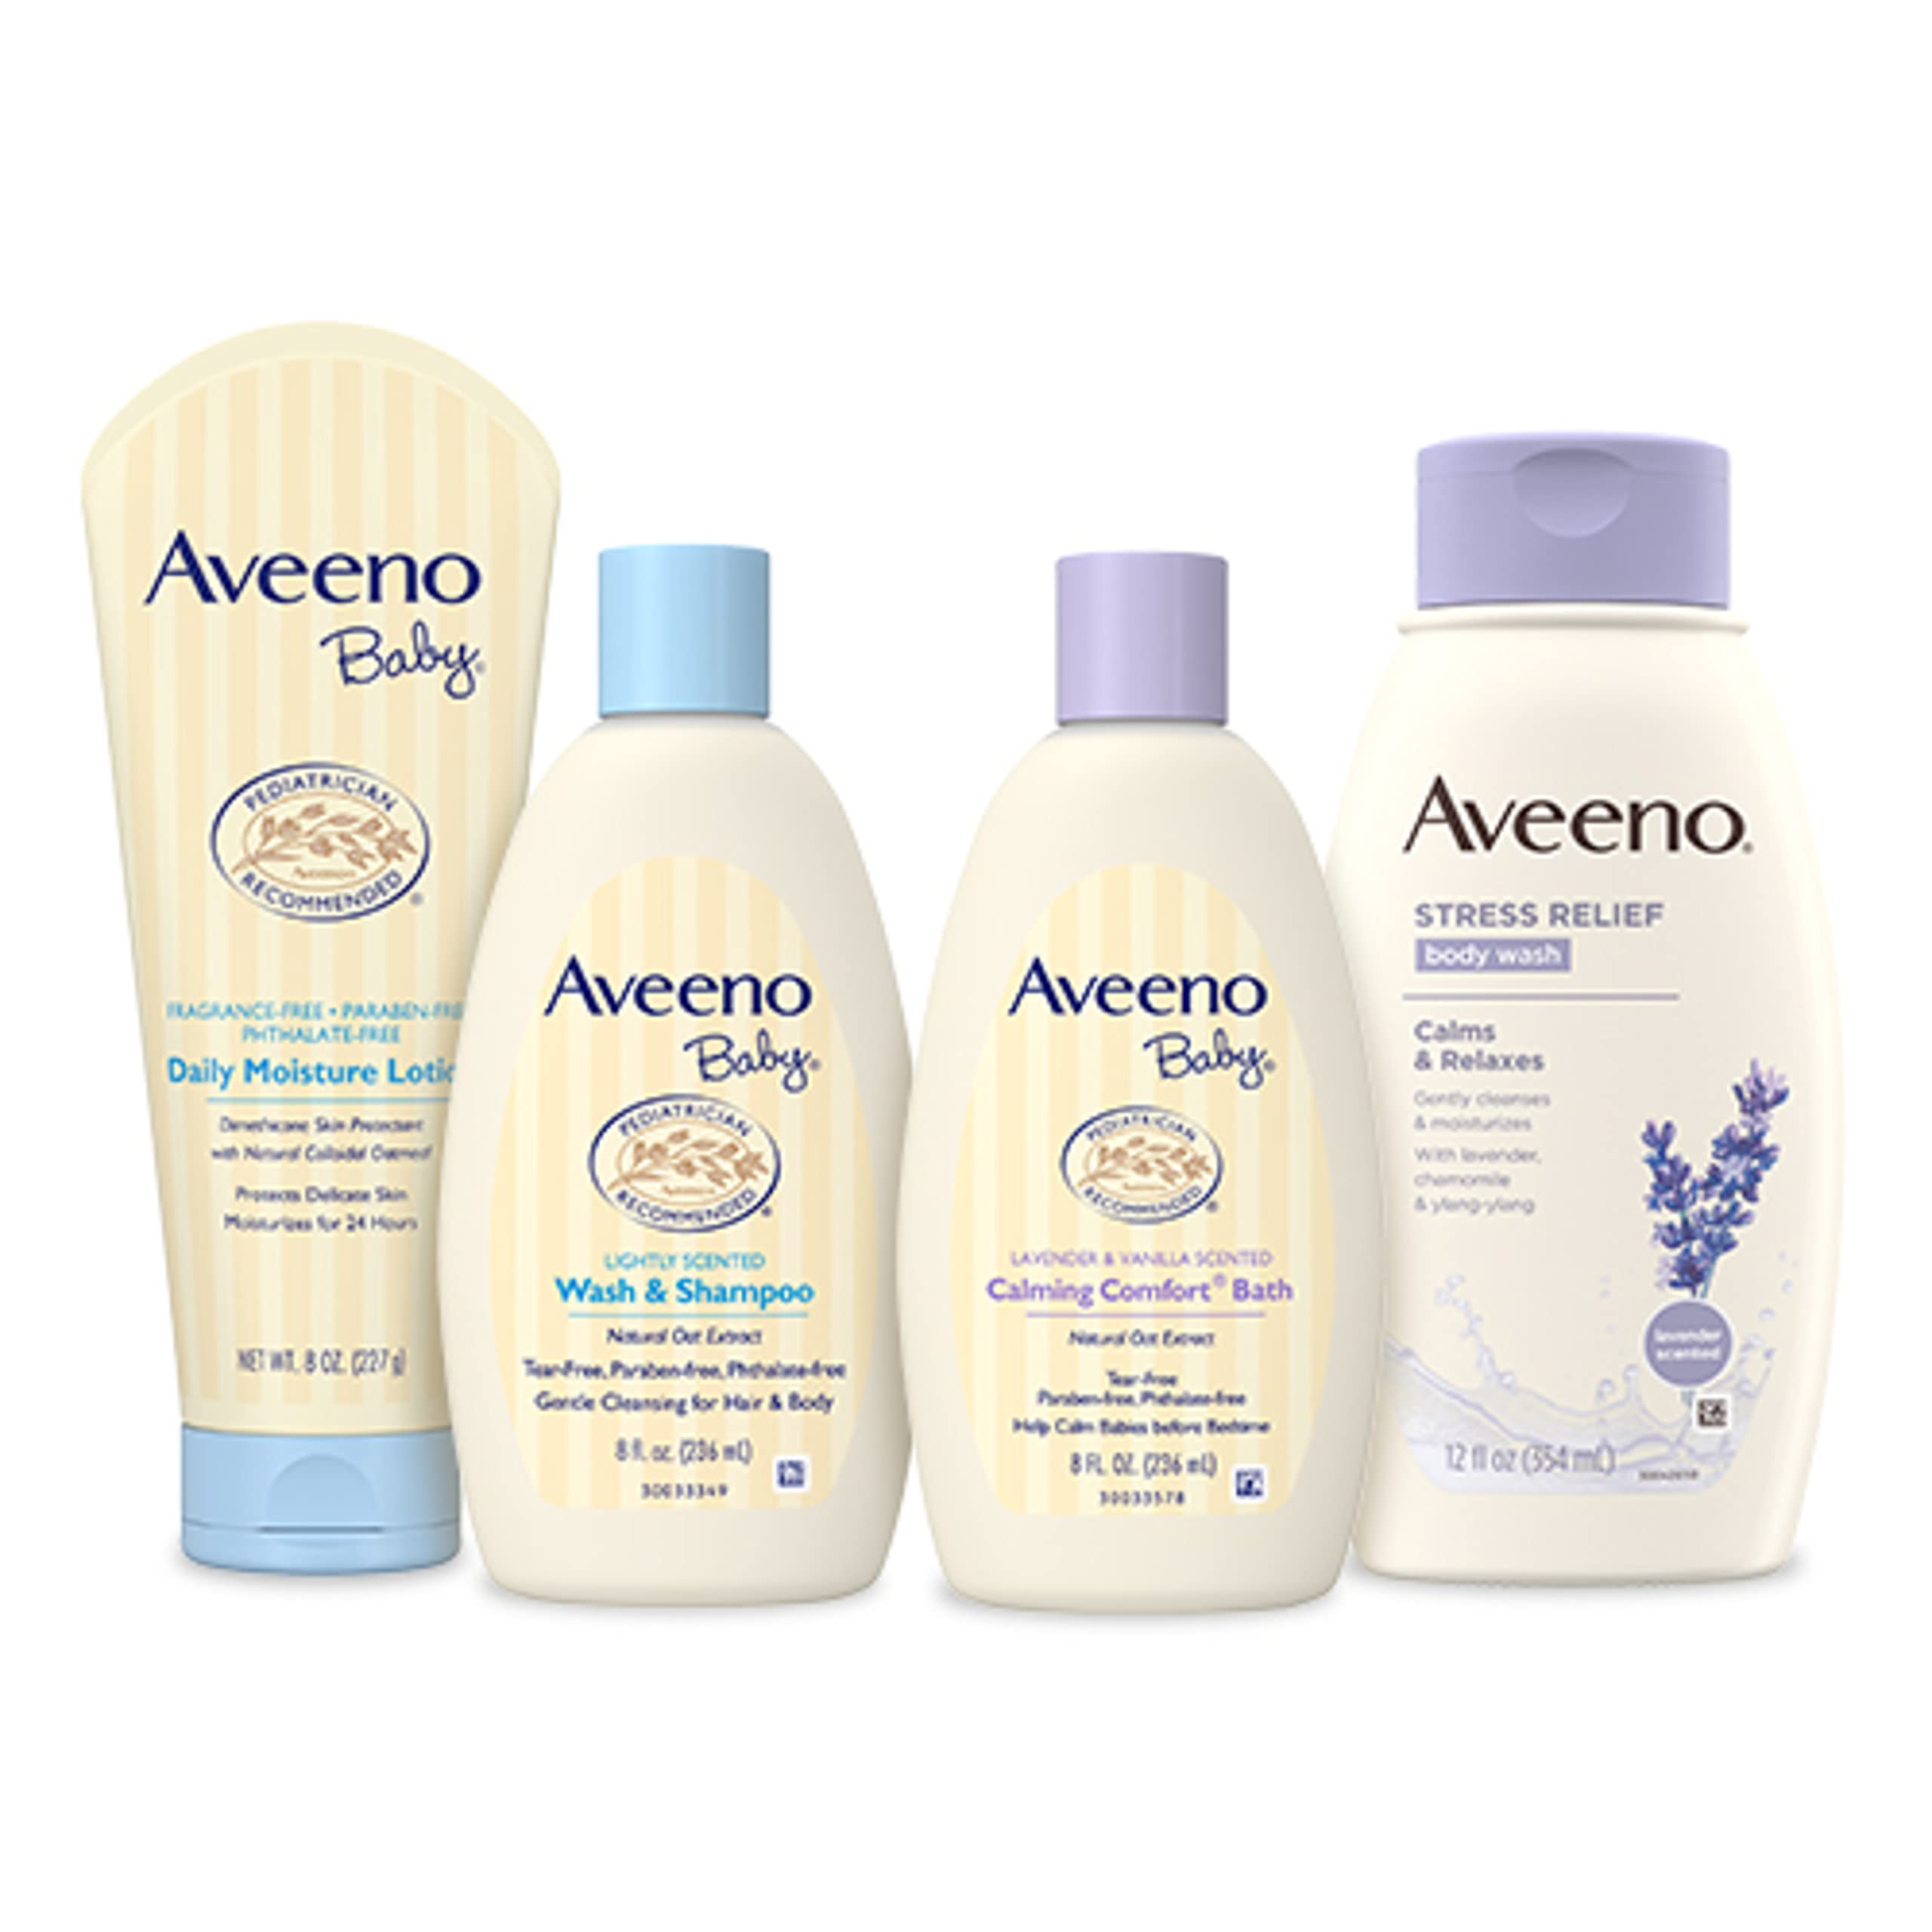 Aveeno Baby Mommy & Me Daily Bathtime Gift Set including Baby Wash &  Shampoo, Calming Baby Bath & Wash, Baby Moisturizing Lotion & Stress Relief  Body Wash for Mom, Soap-Free, 4 items